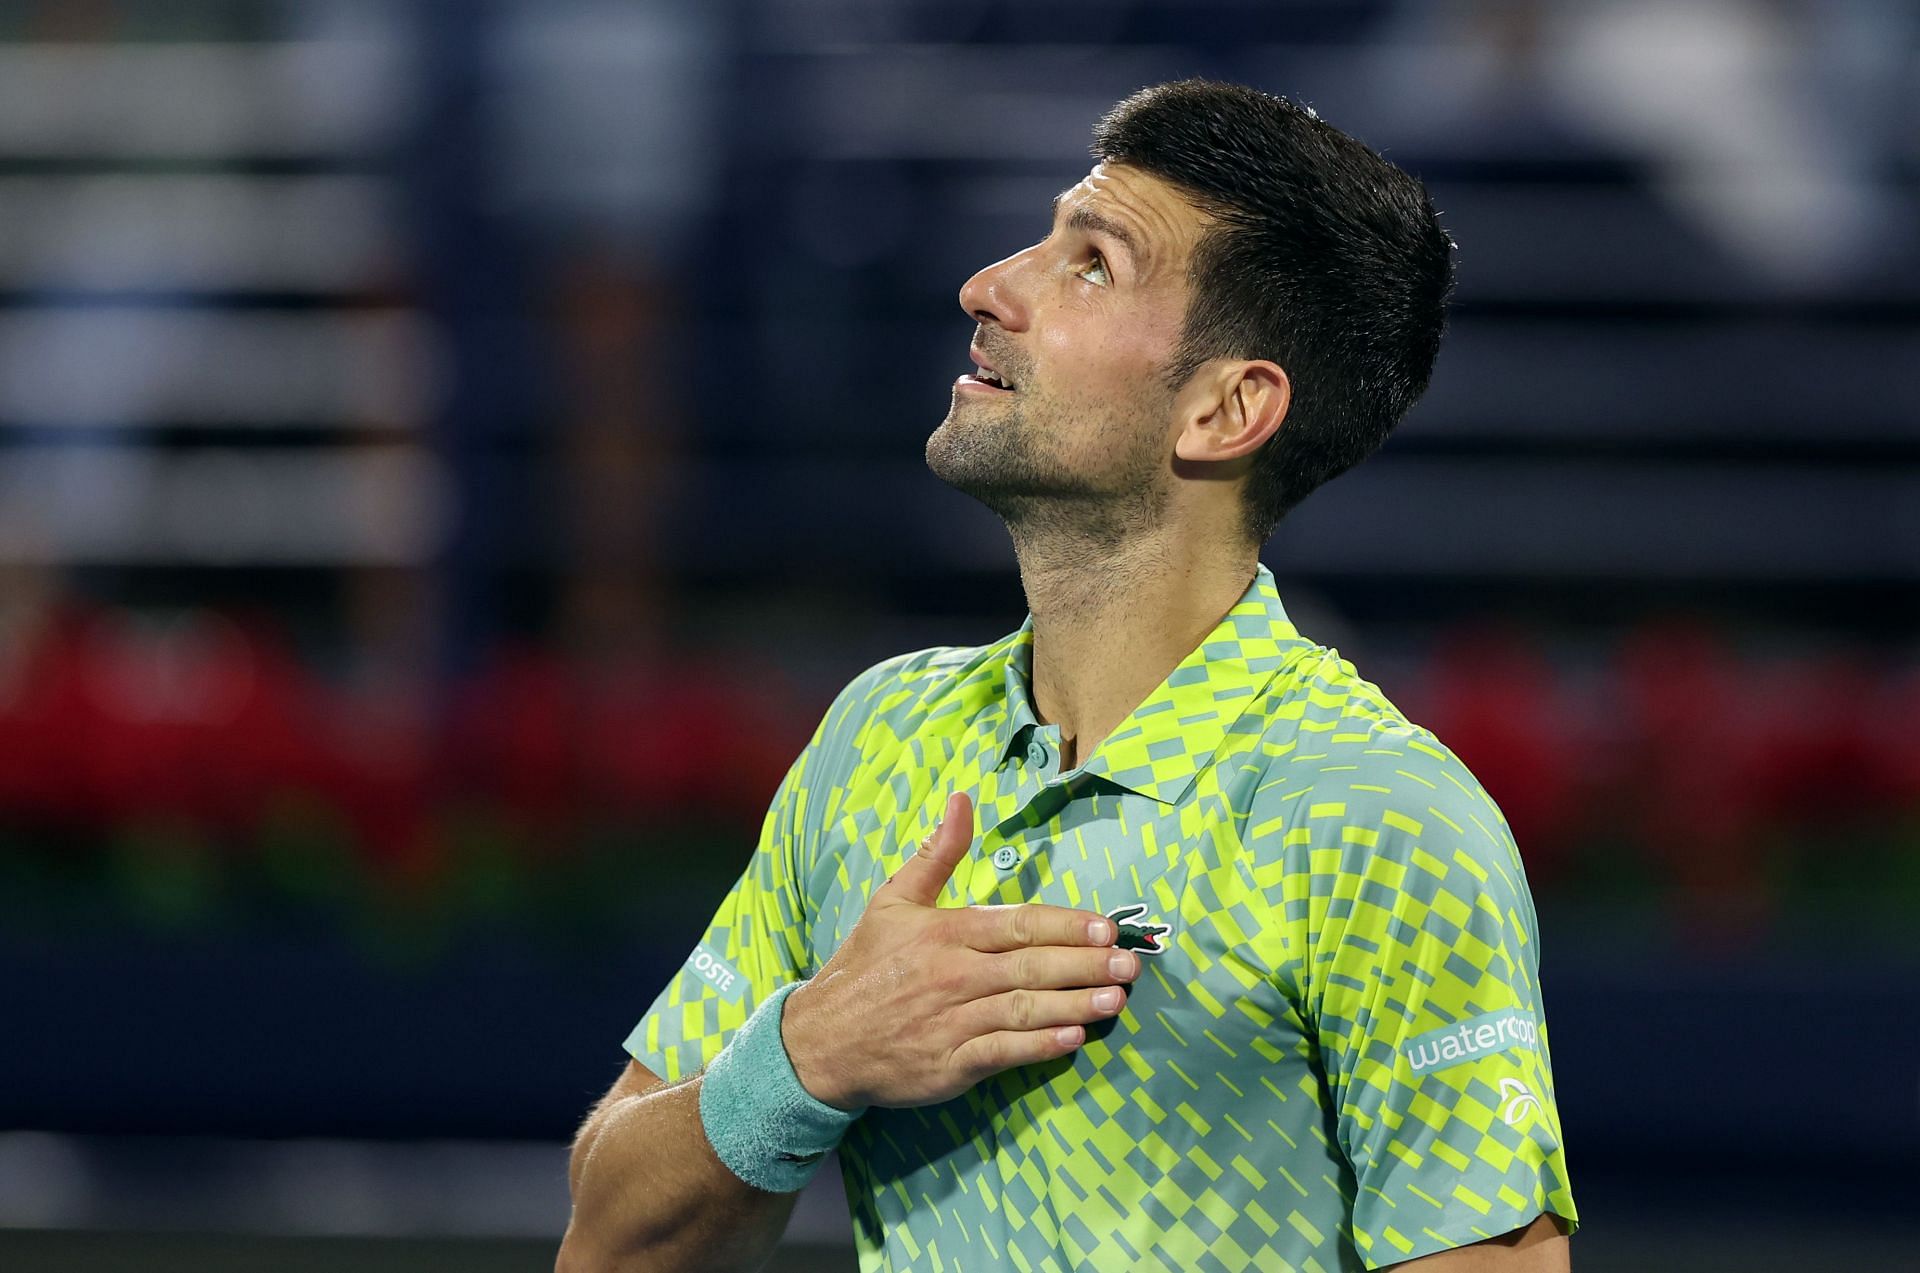 Novak Djokovic becomes first player in Open Era to record 10 winning streaks of at least 20 matches